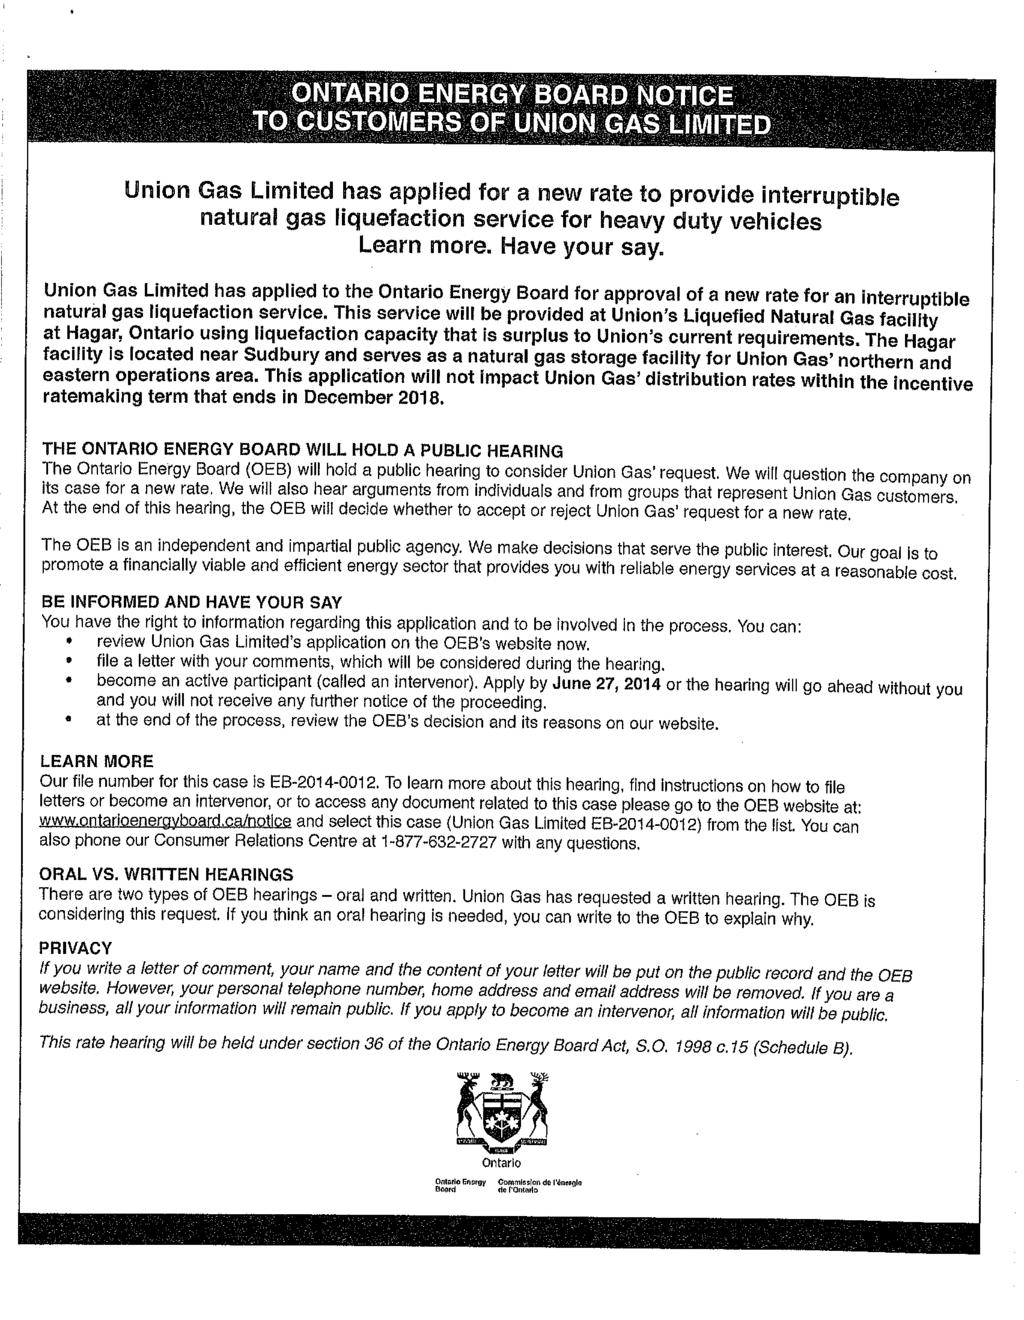 Letter from Union Gas dated June 11,